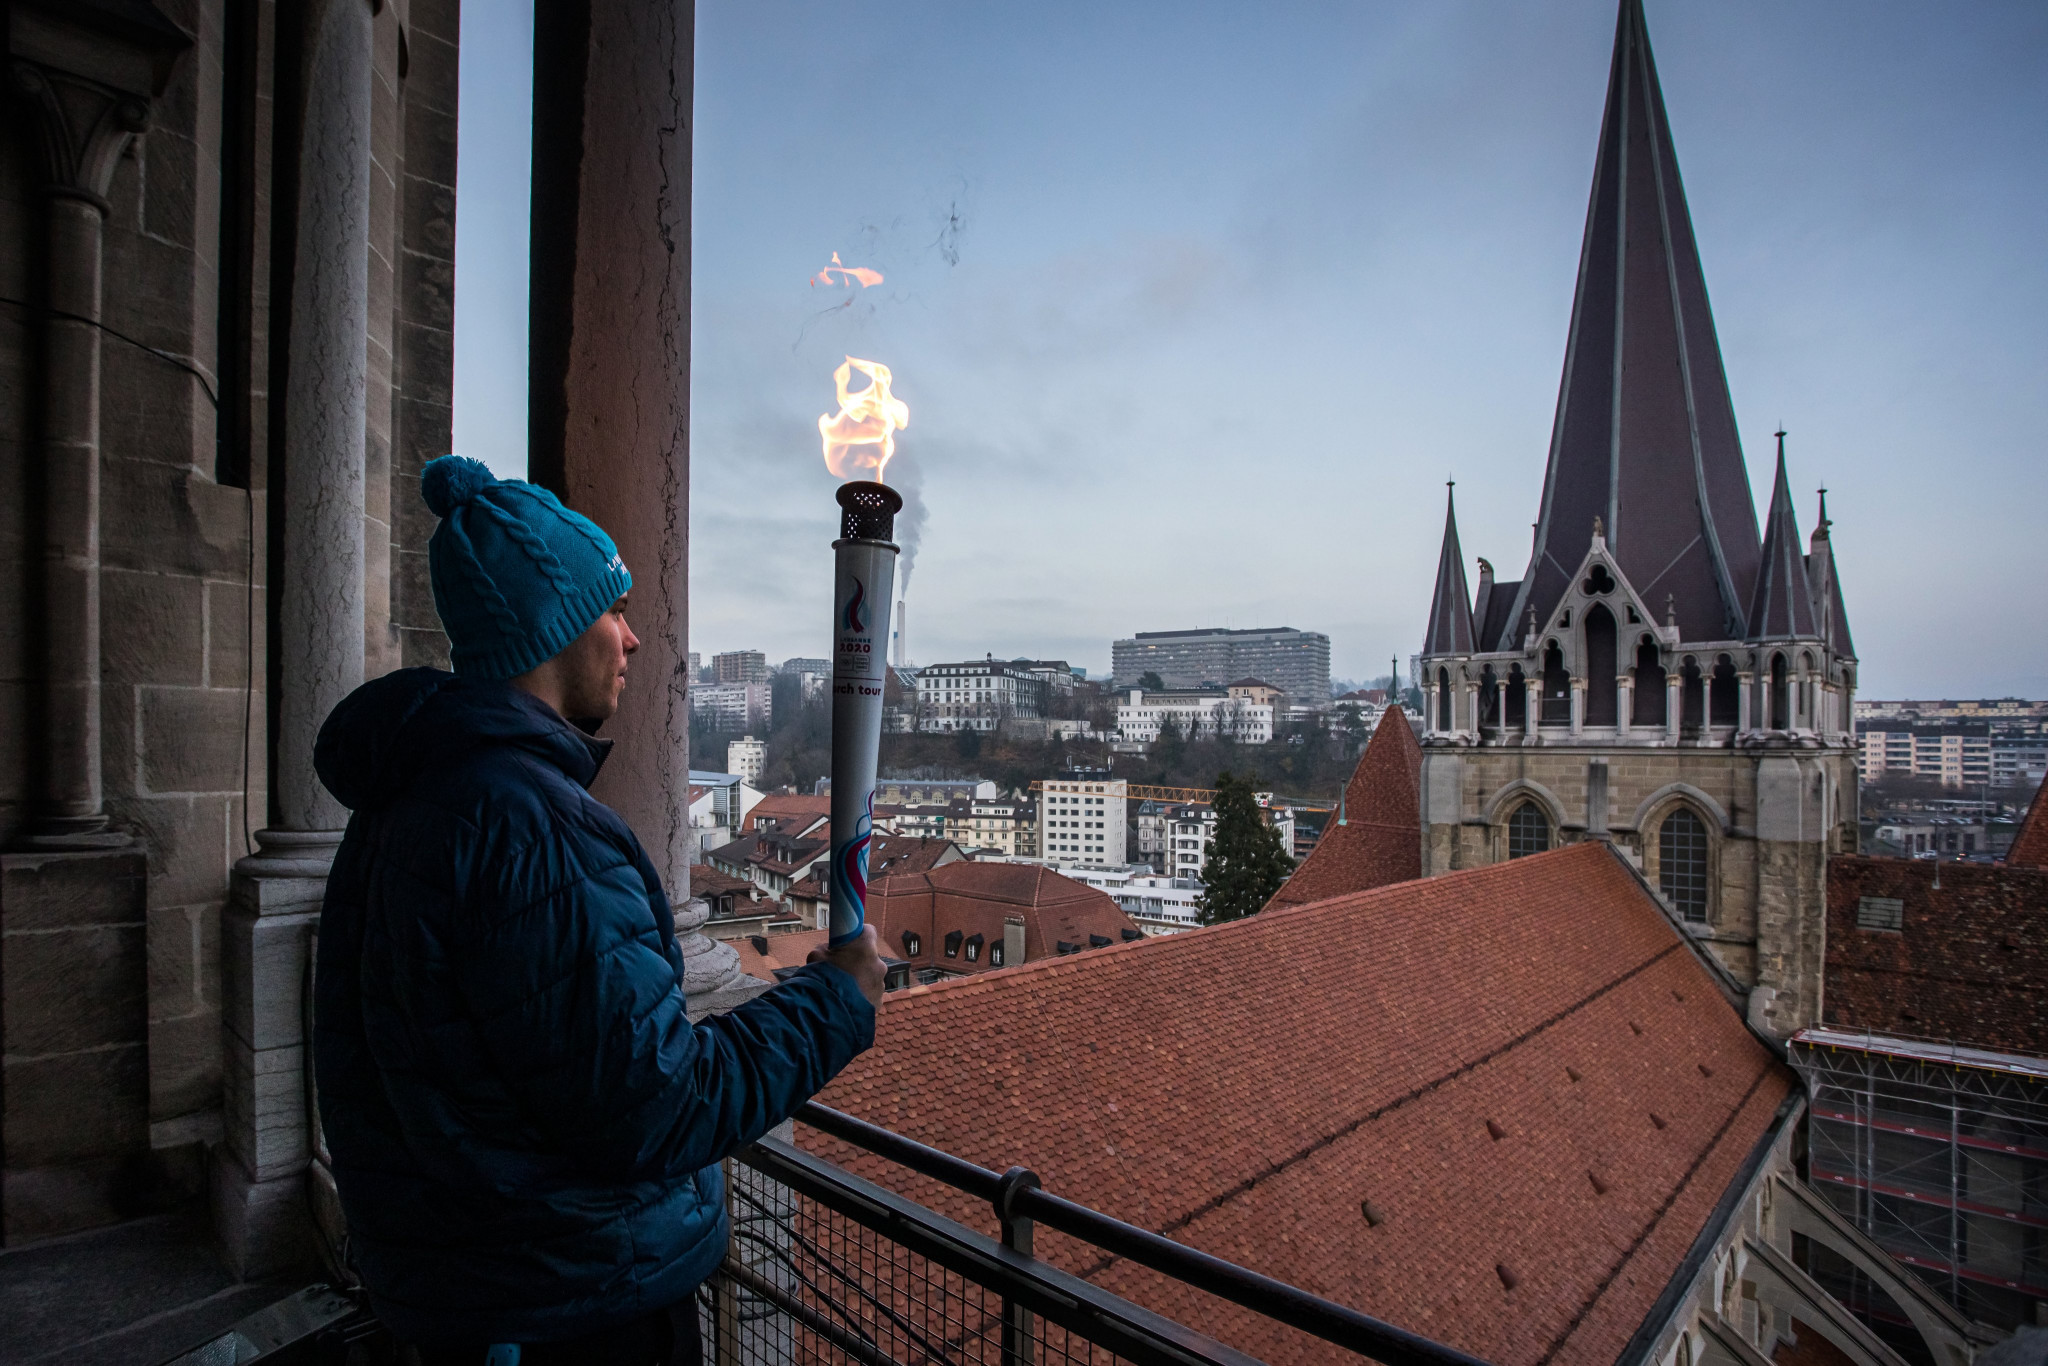 Winter Youth Olympic Games flame lights up Lausanne 